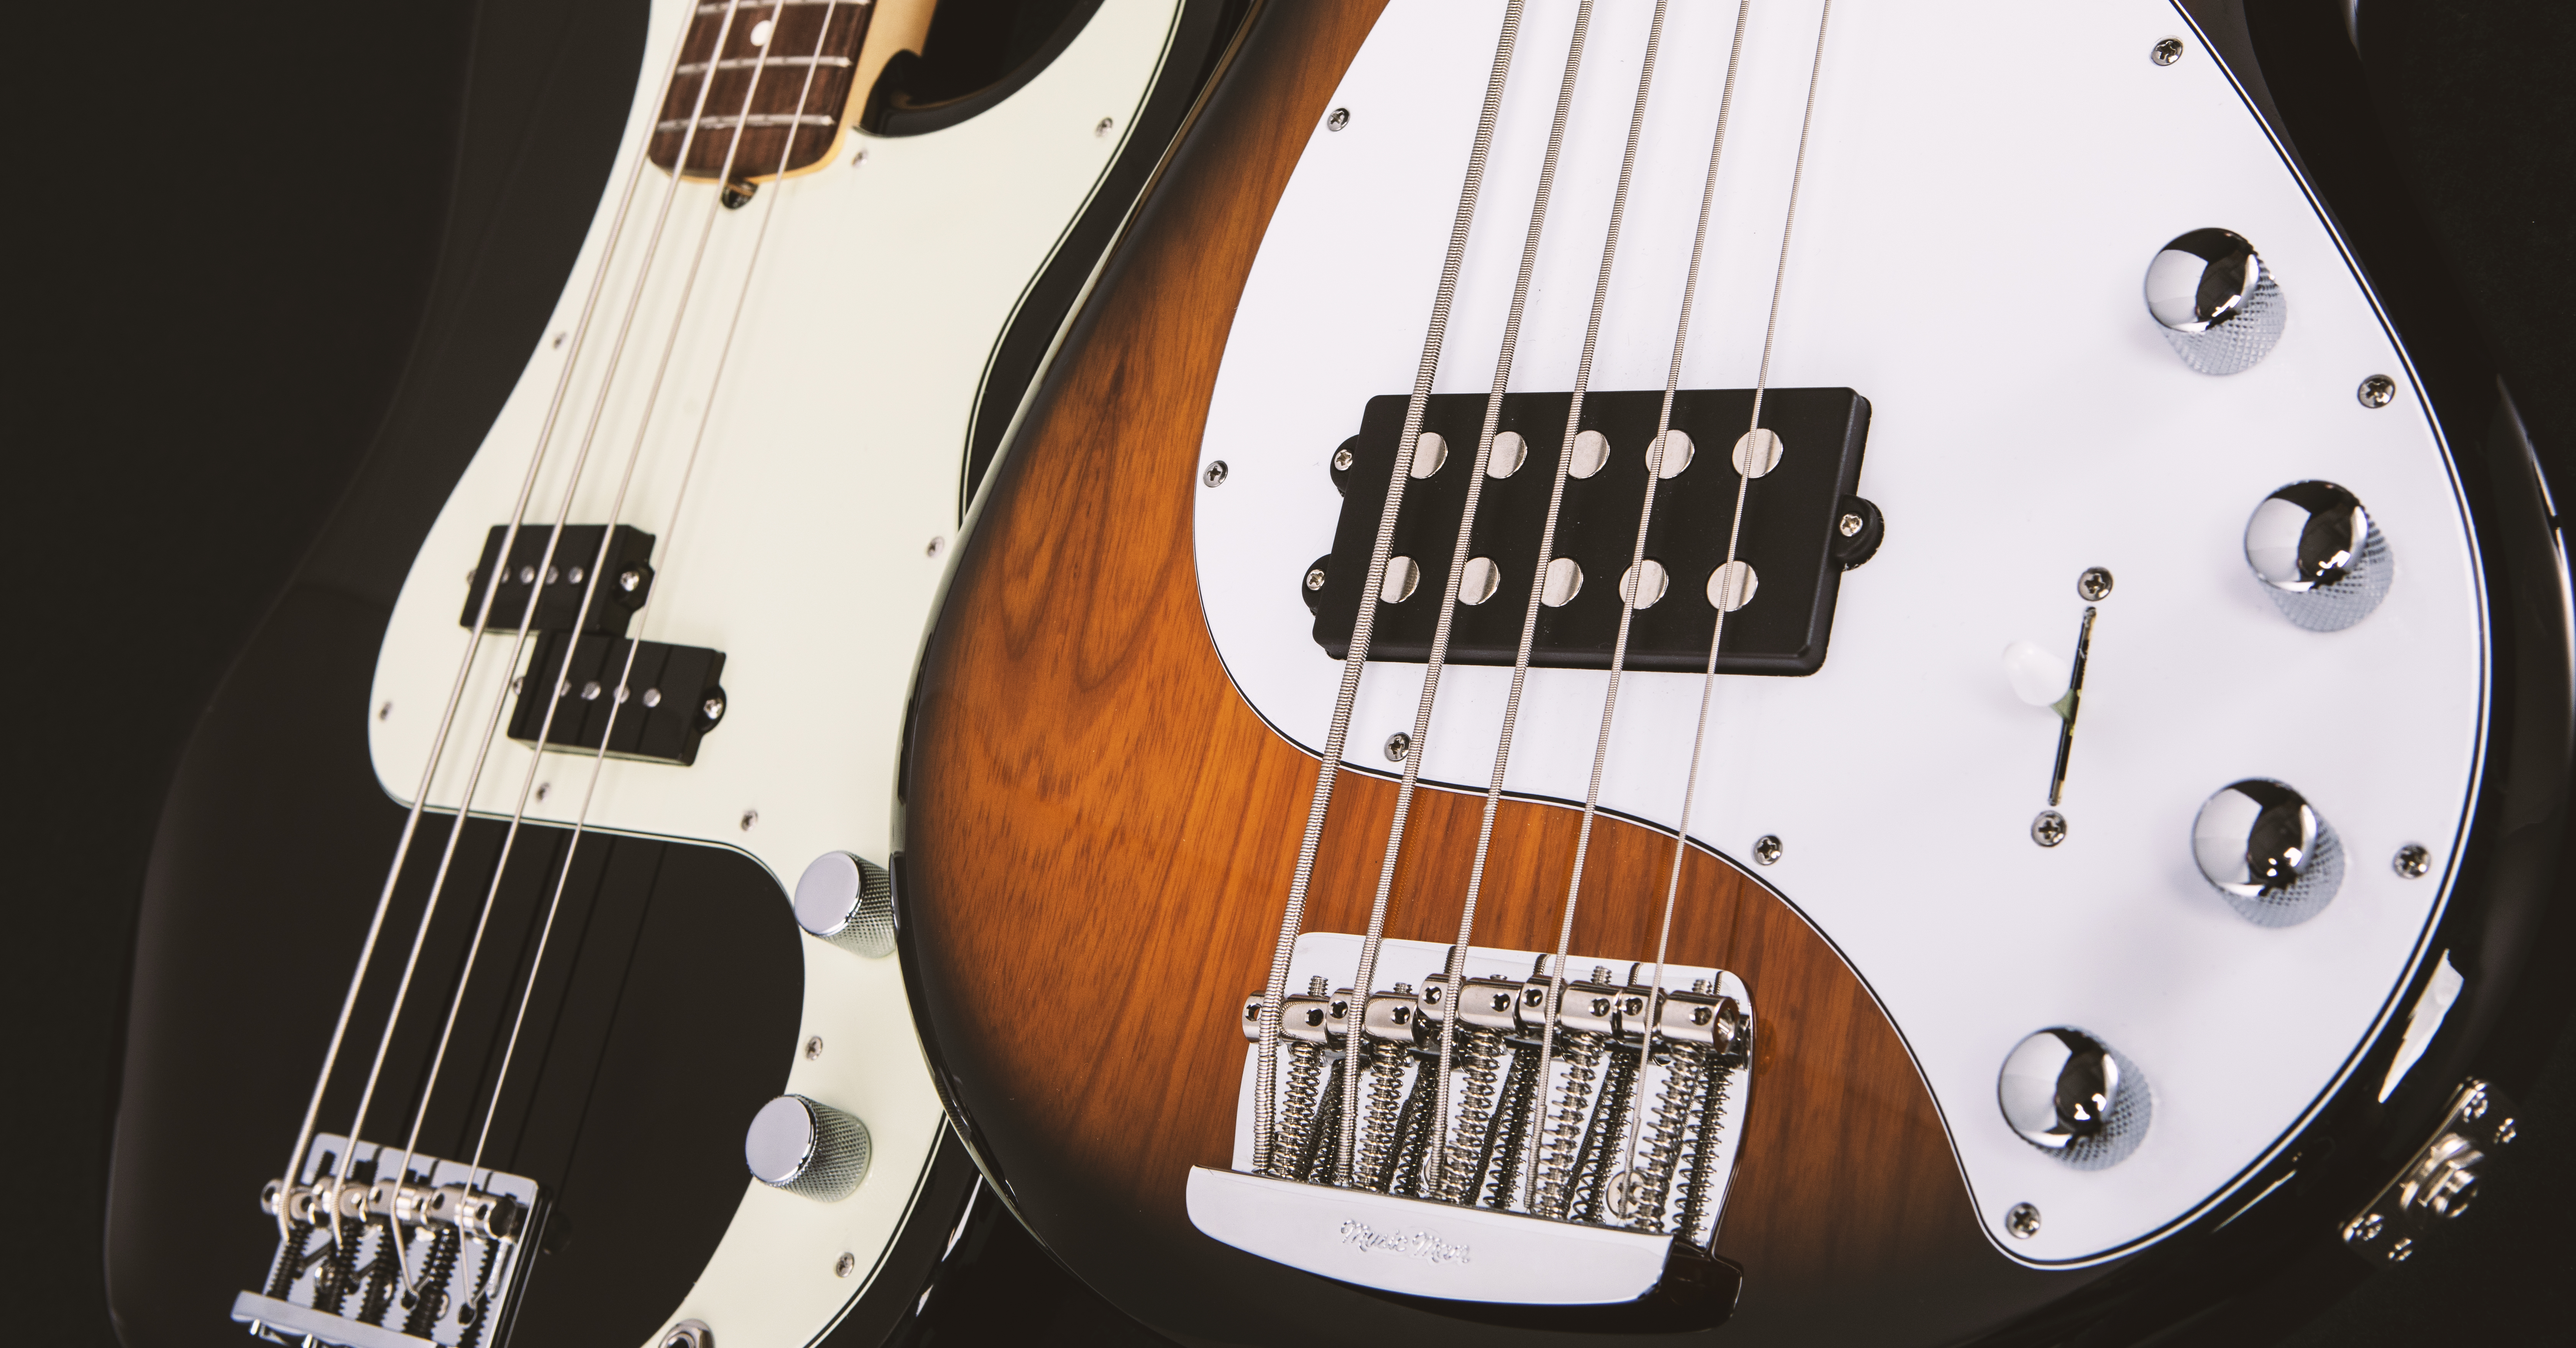 Passive vs. Active Basses: What's the Difference?